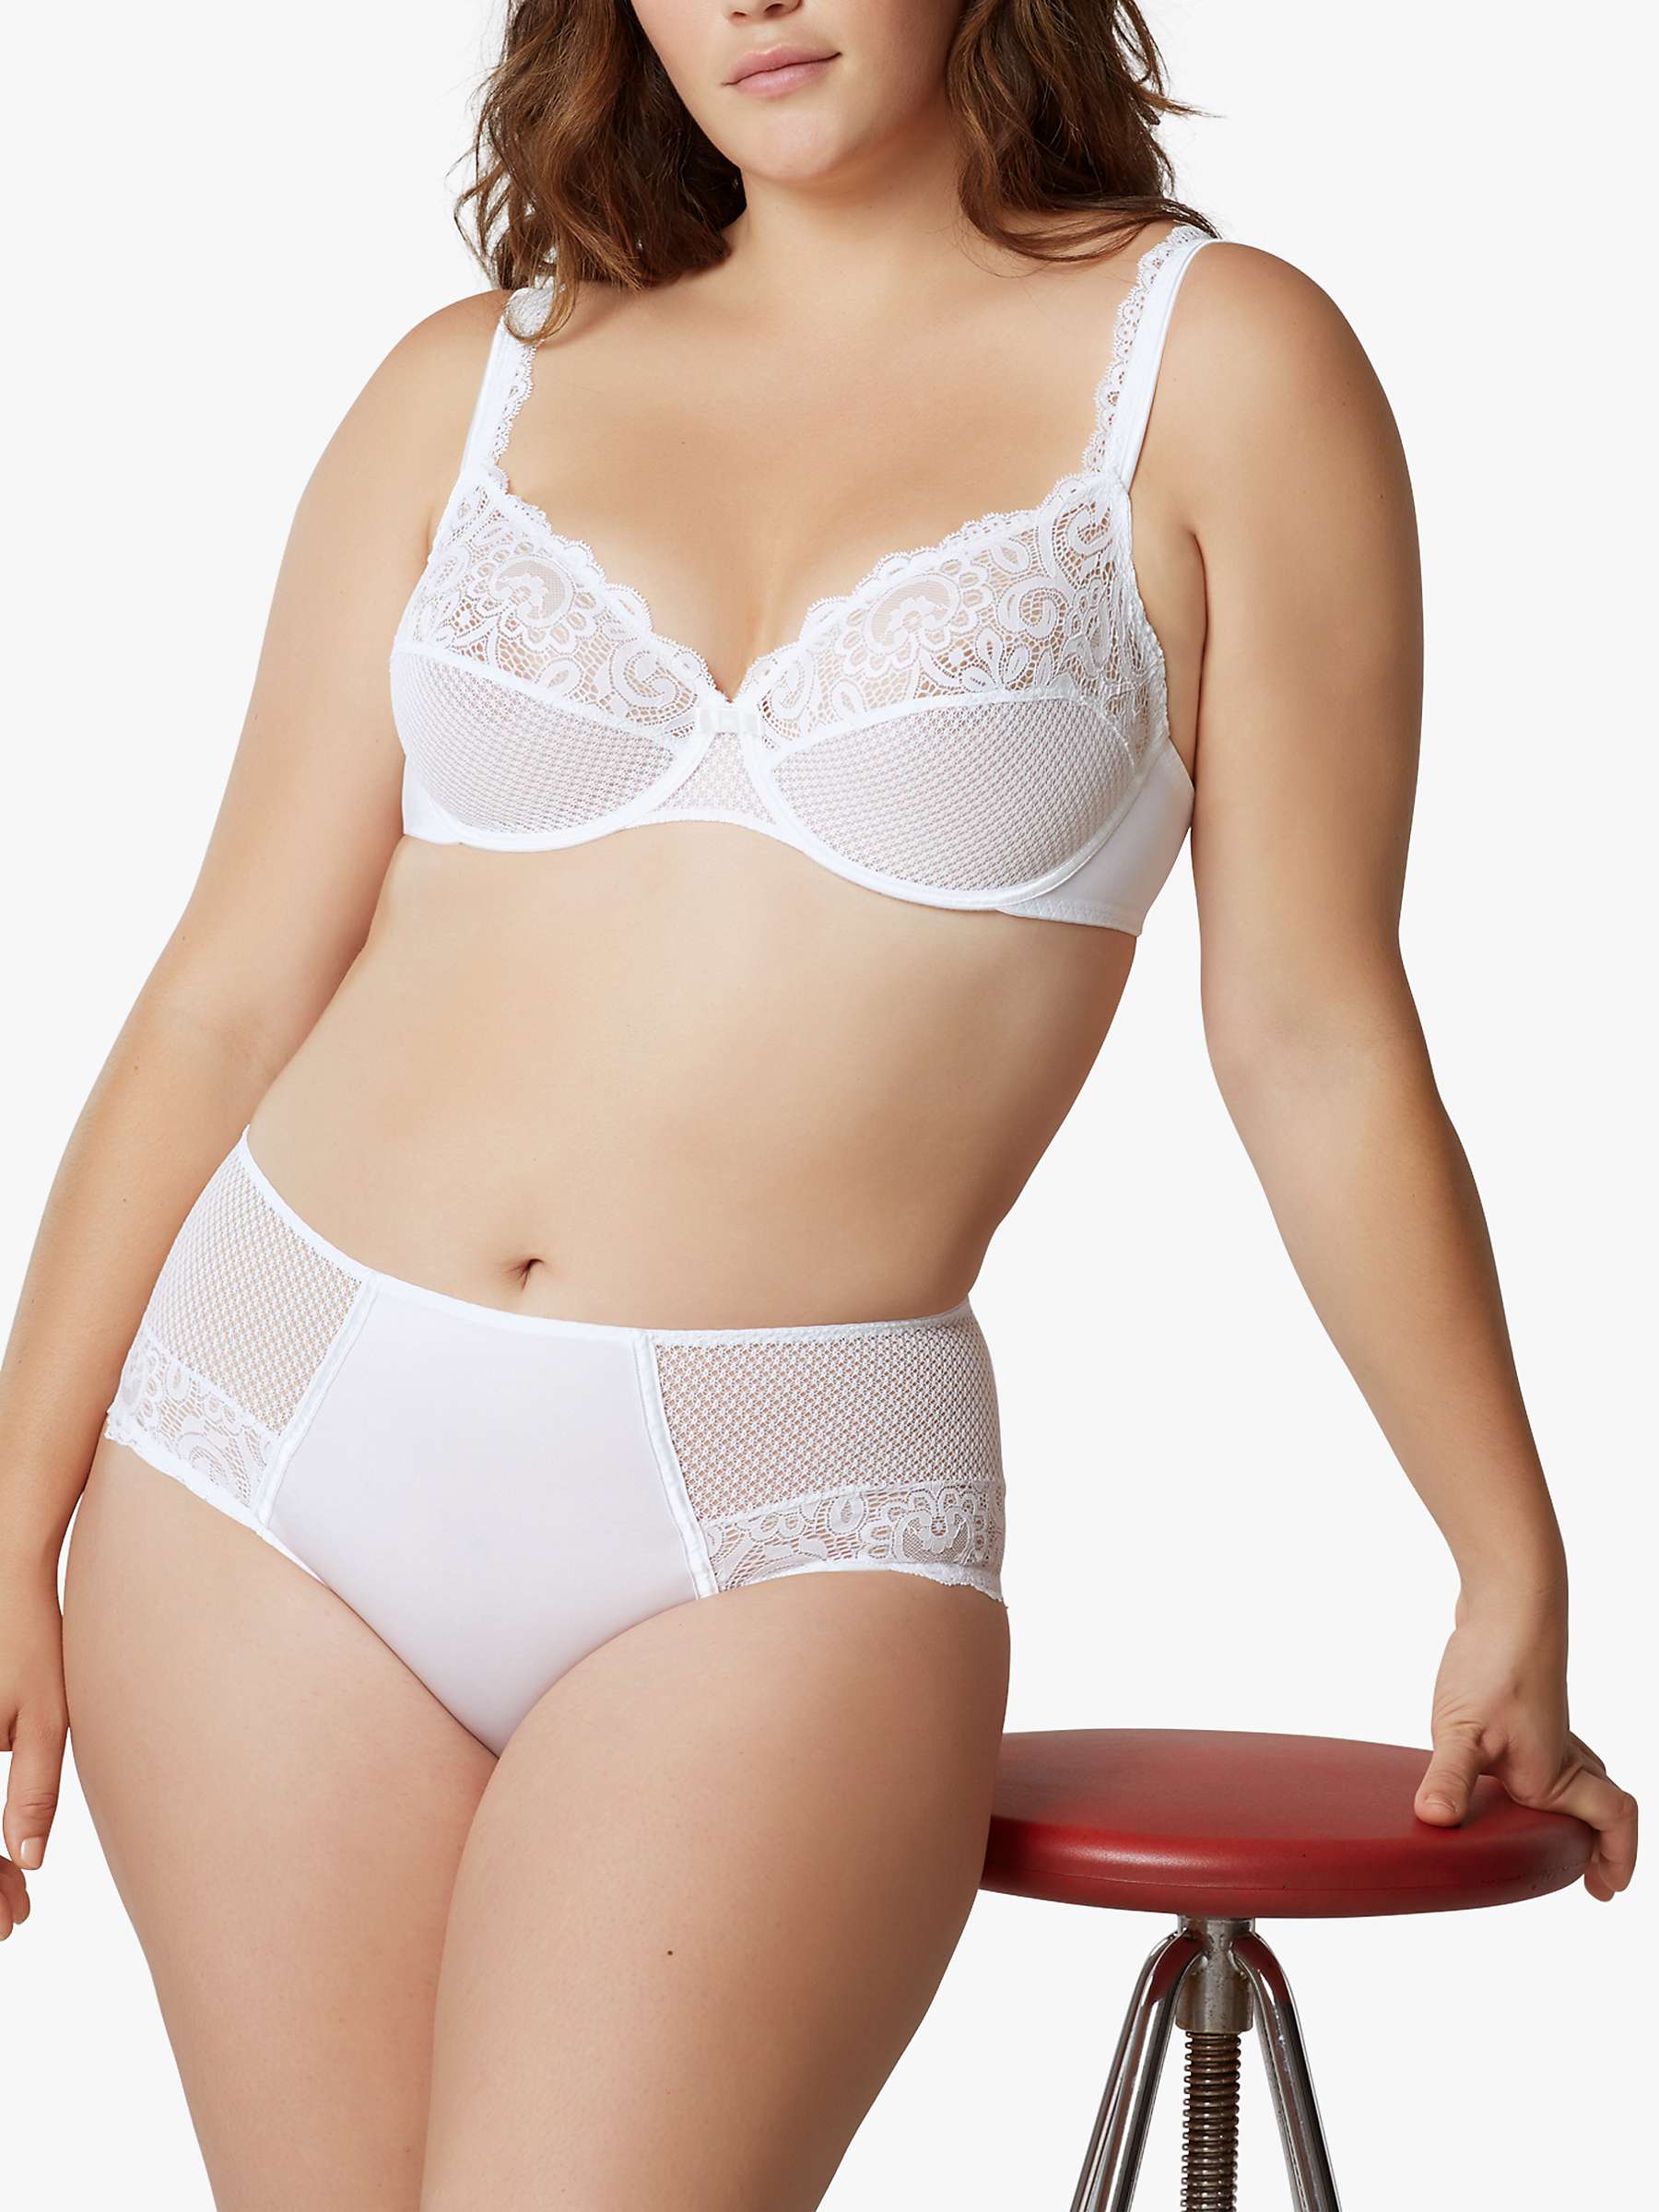 Buy Maison Lejaby Gaby Full Cup Underwired Bra, Blanc Online at johnlewis.com